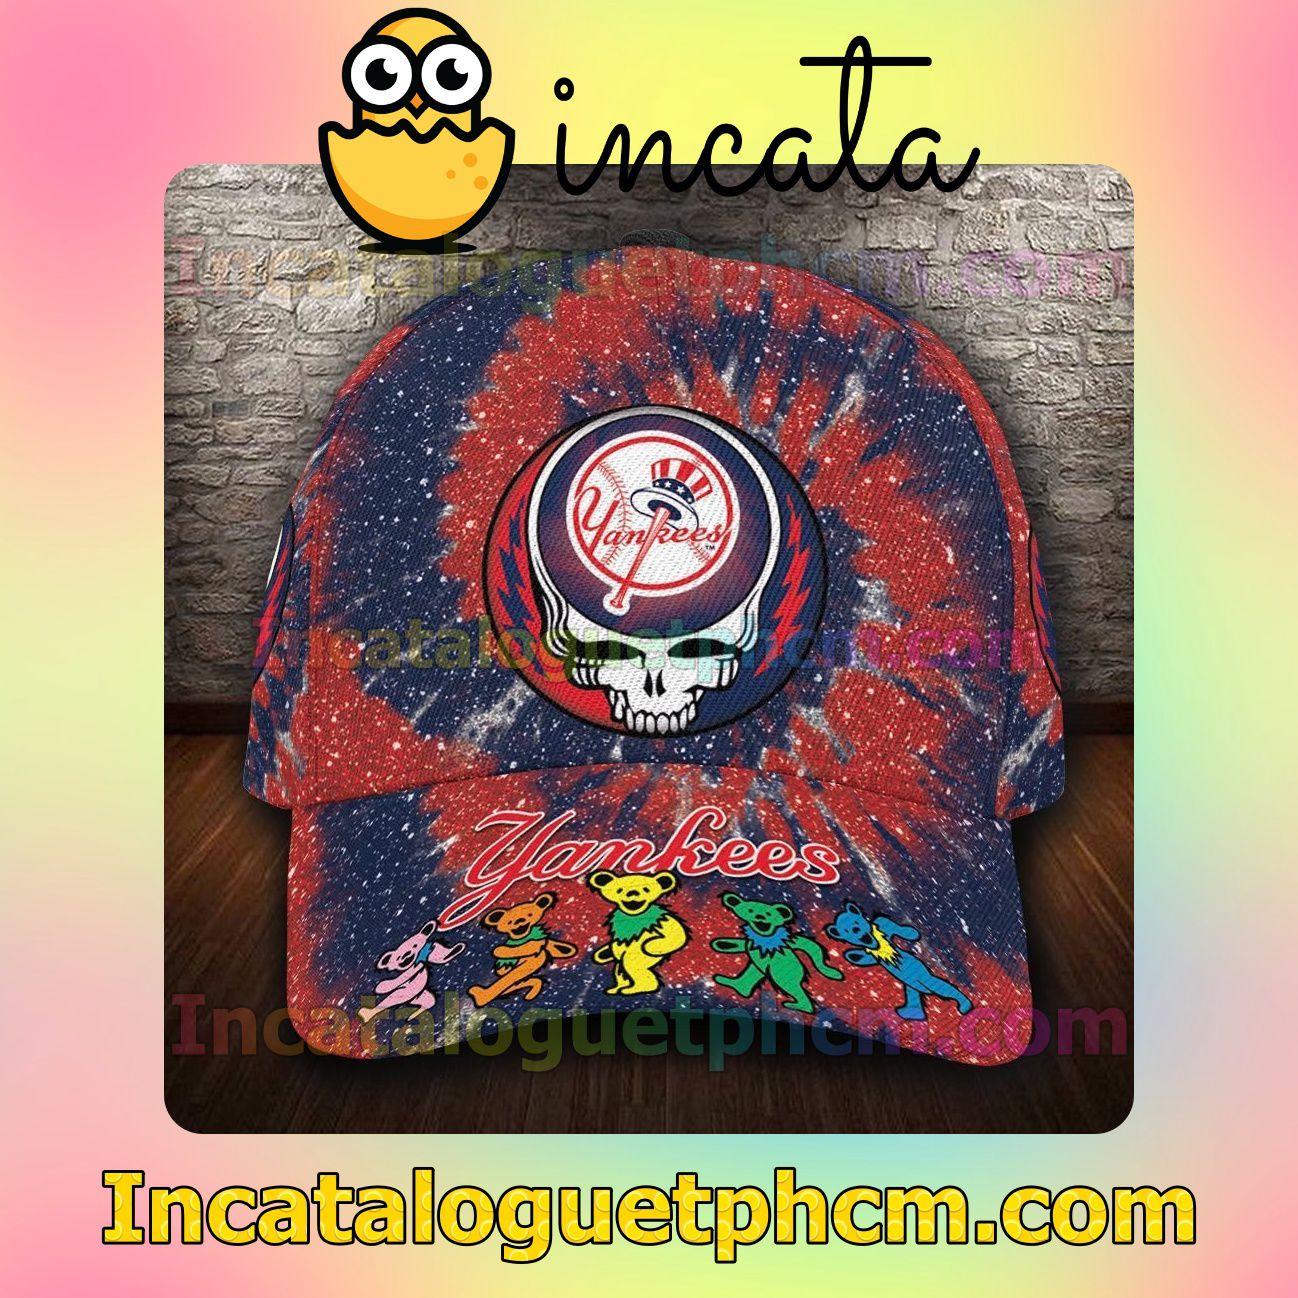 Check out New York Yankees & Grateful Dead Band MLB Customized Hat Caps